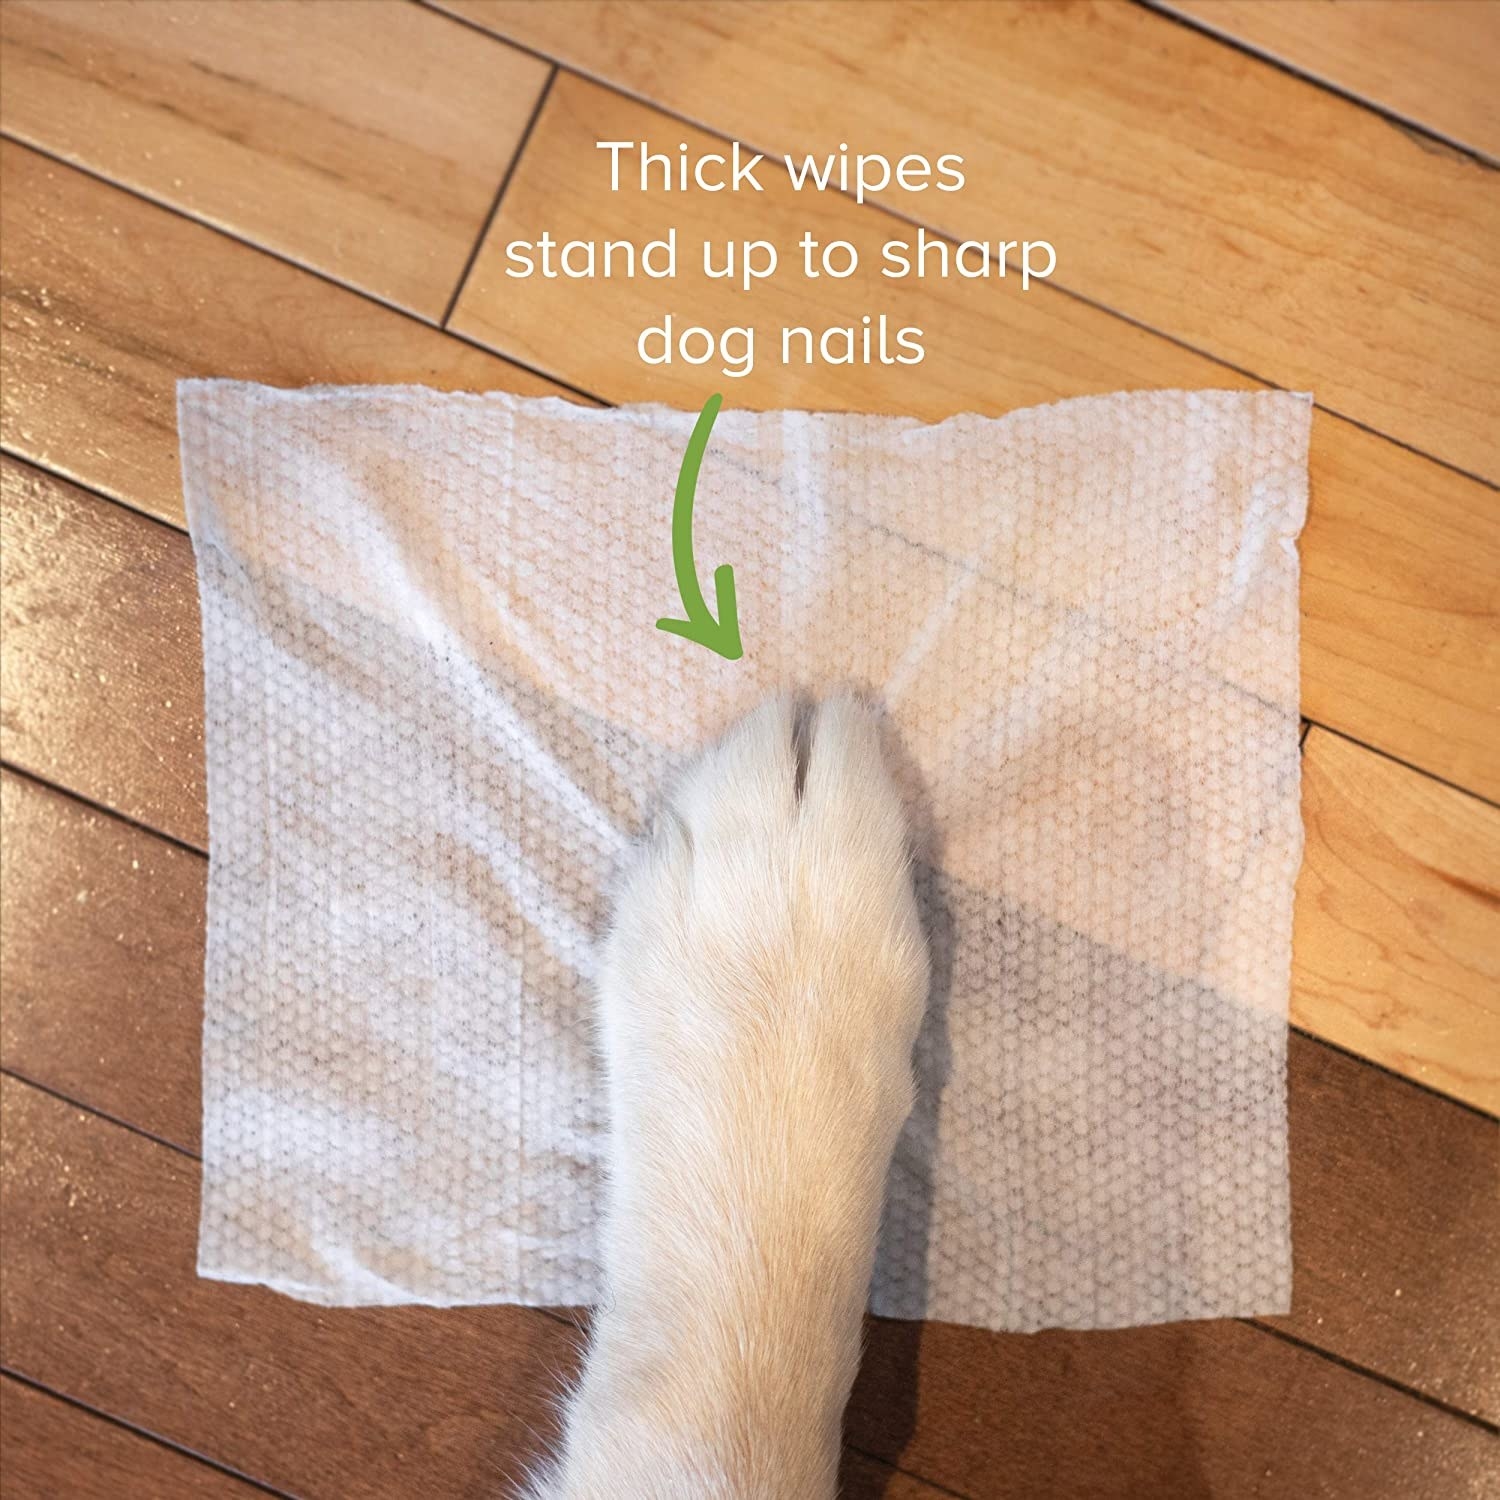 A dog&#x27;s paw on one of the wipes